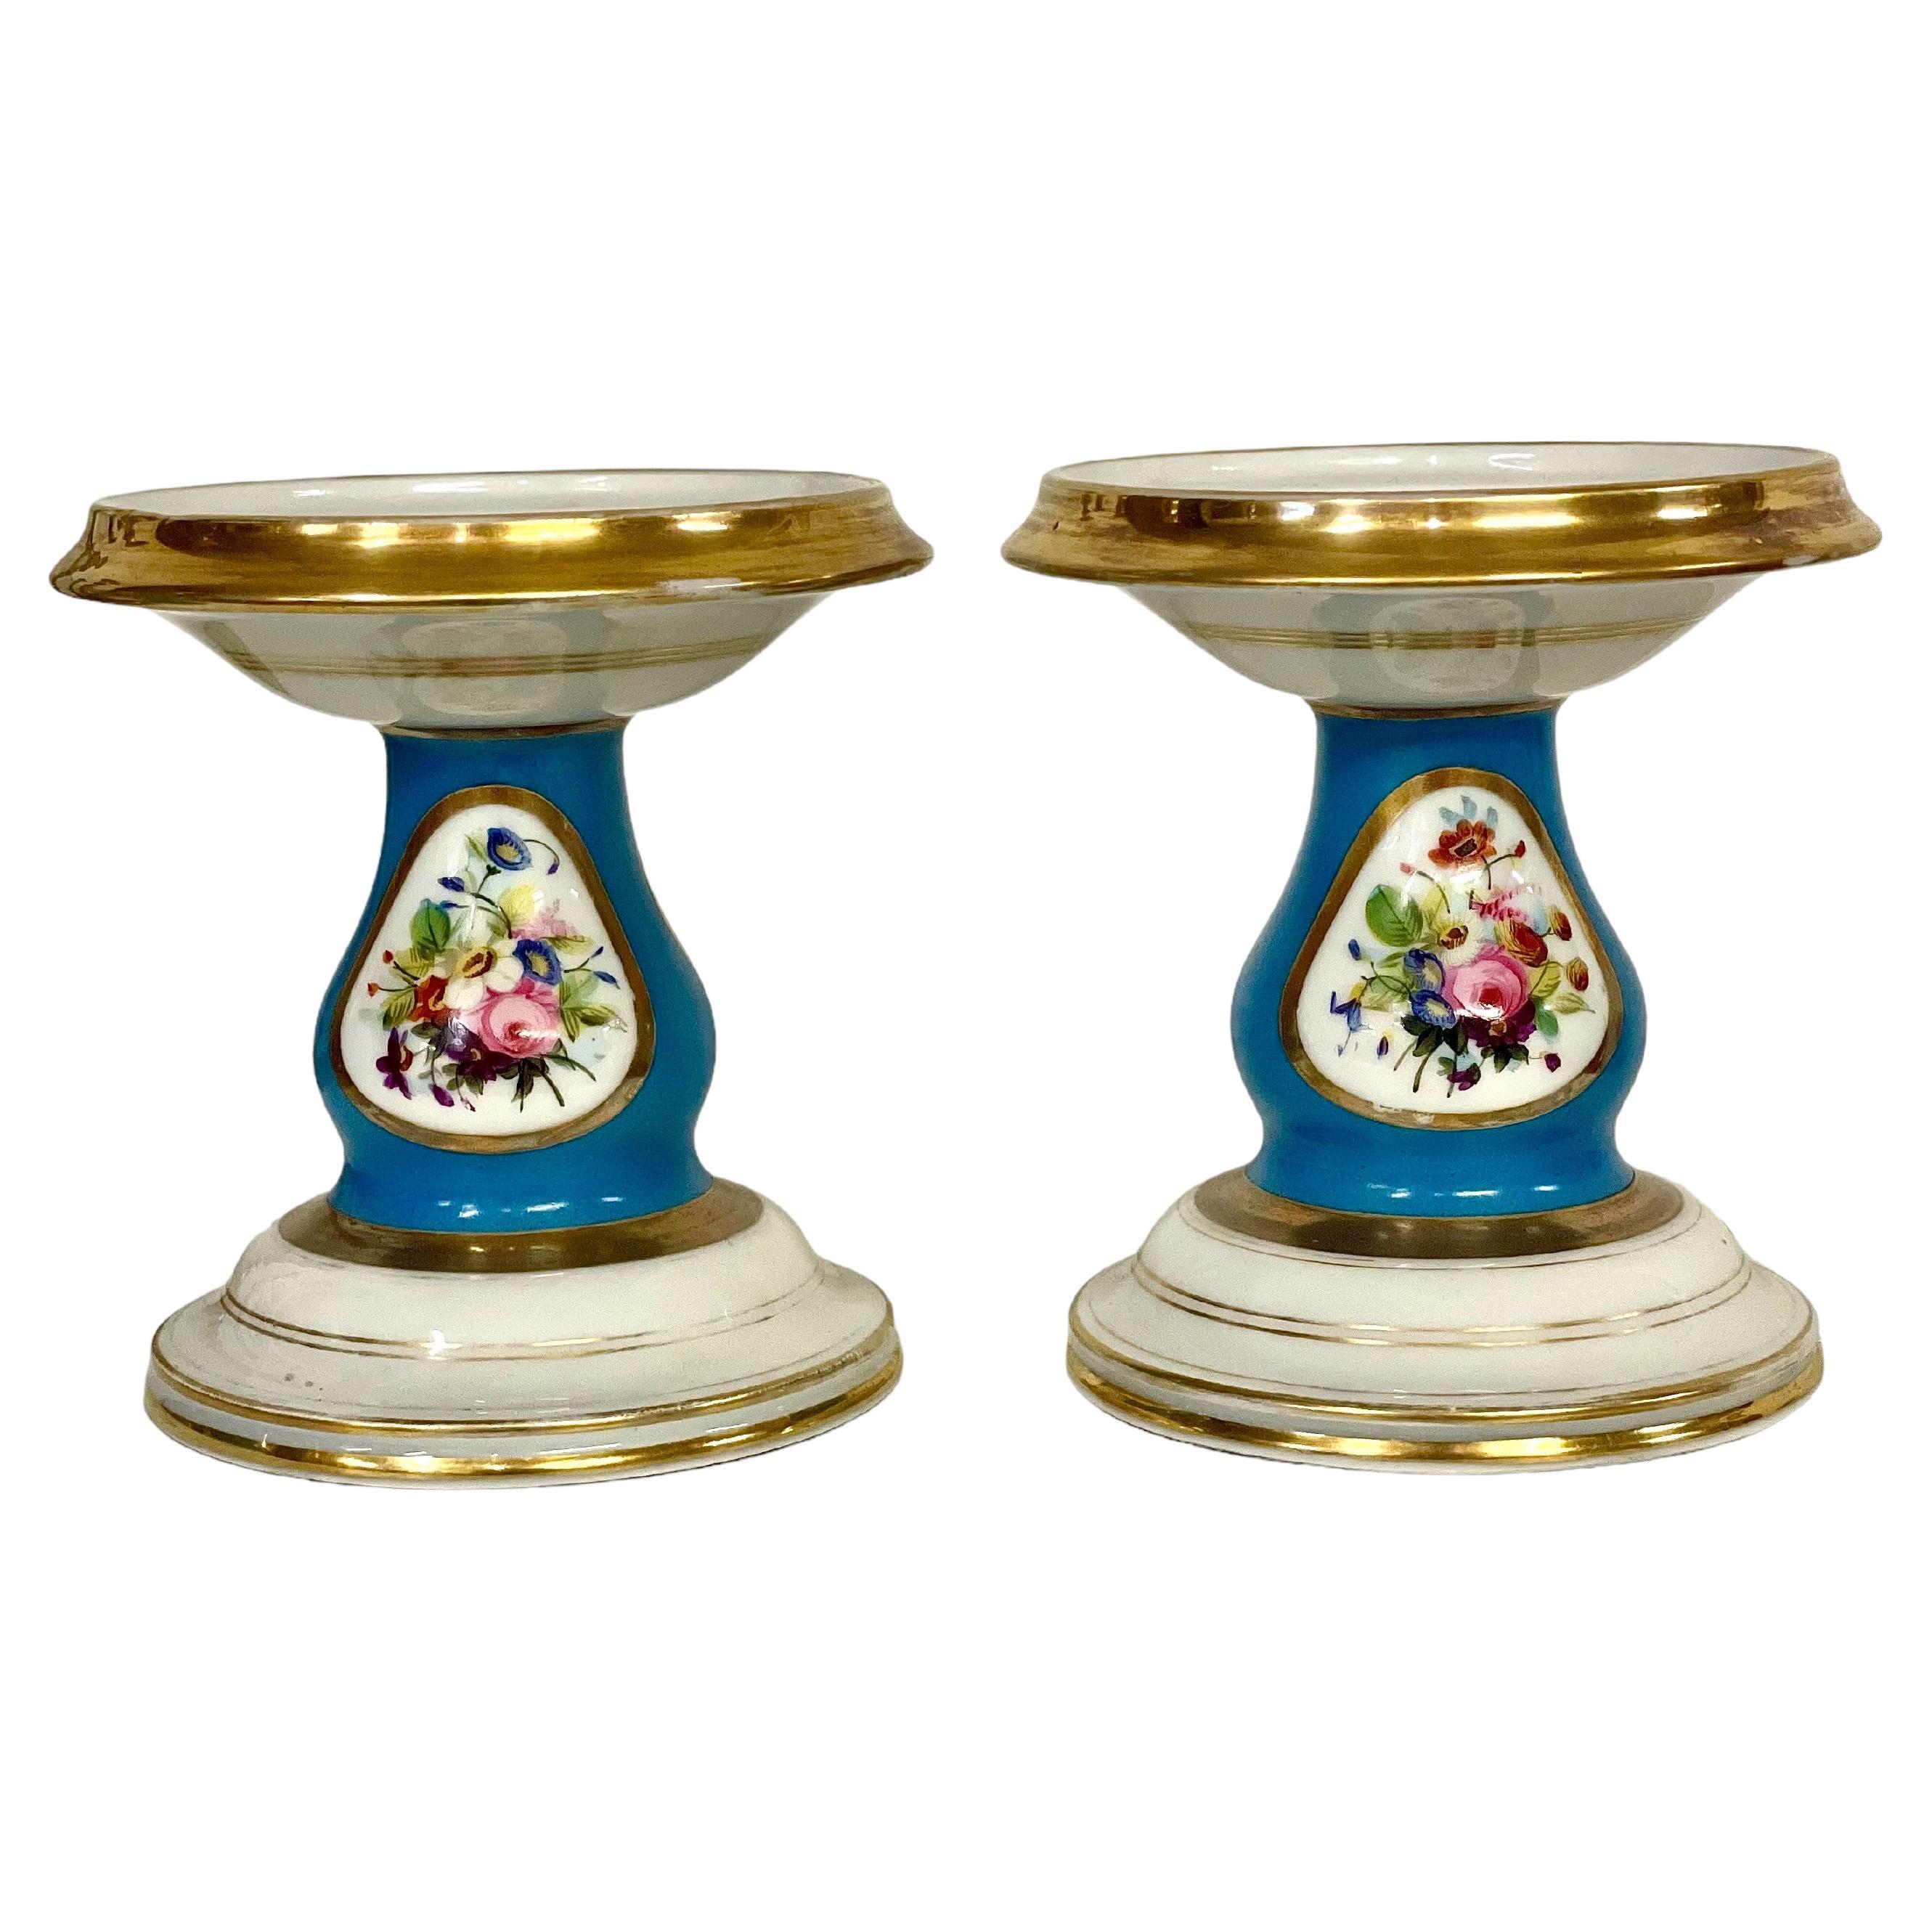 An exquisite pair of Porcelain de Paris 'cassolettes', finely crafted and hand-painted with a cartouche of polychrome flowers on a striking lapis blue background, ornamented all around with gilt accents. Each basin-shaped dish features its own